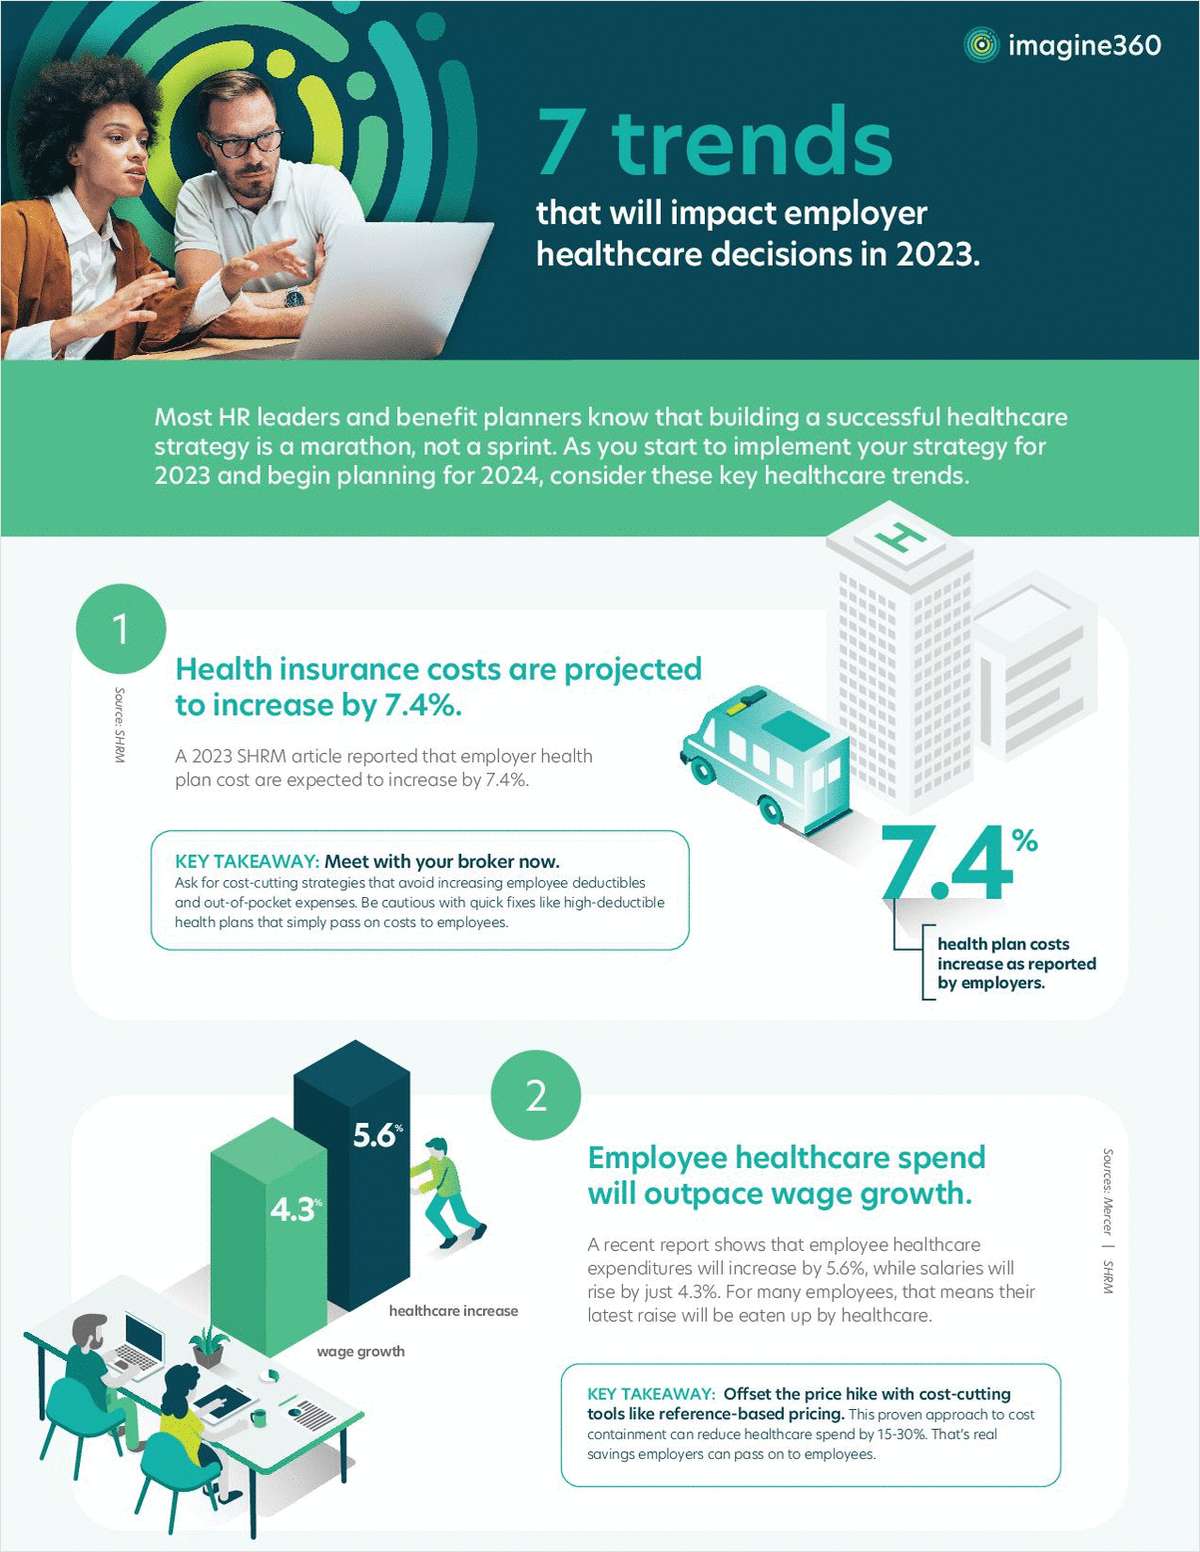 7 Trends That Will Impact Employer Healthcare Decisions in 2023